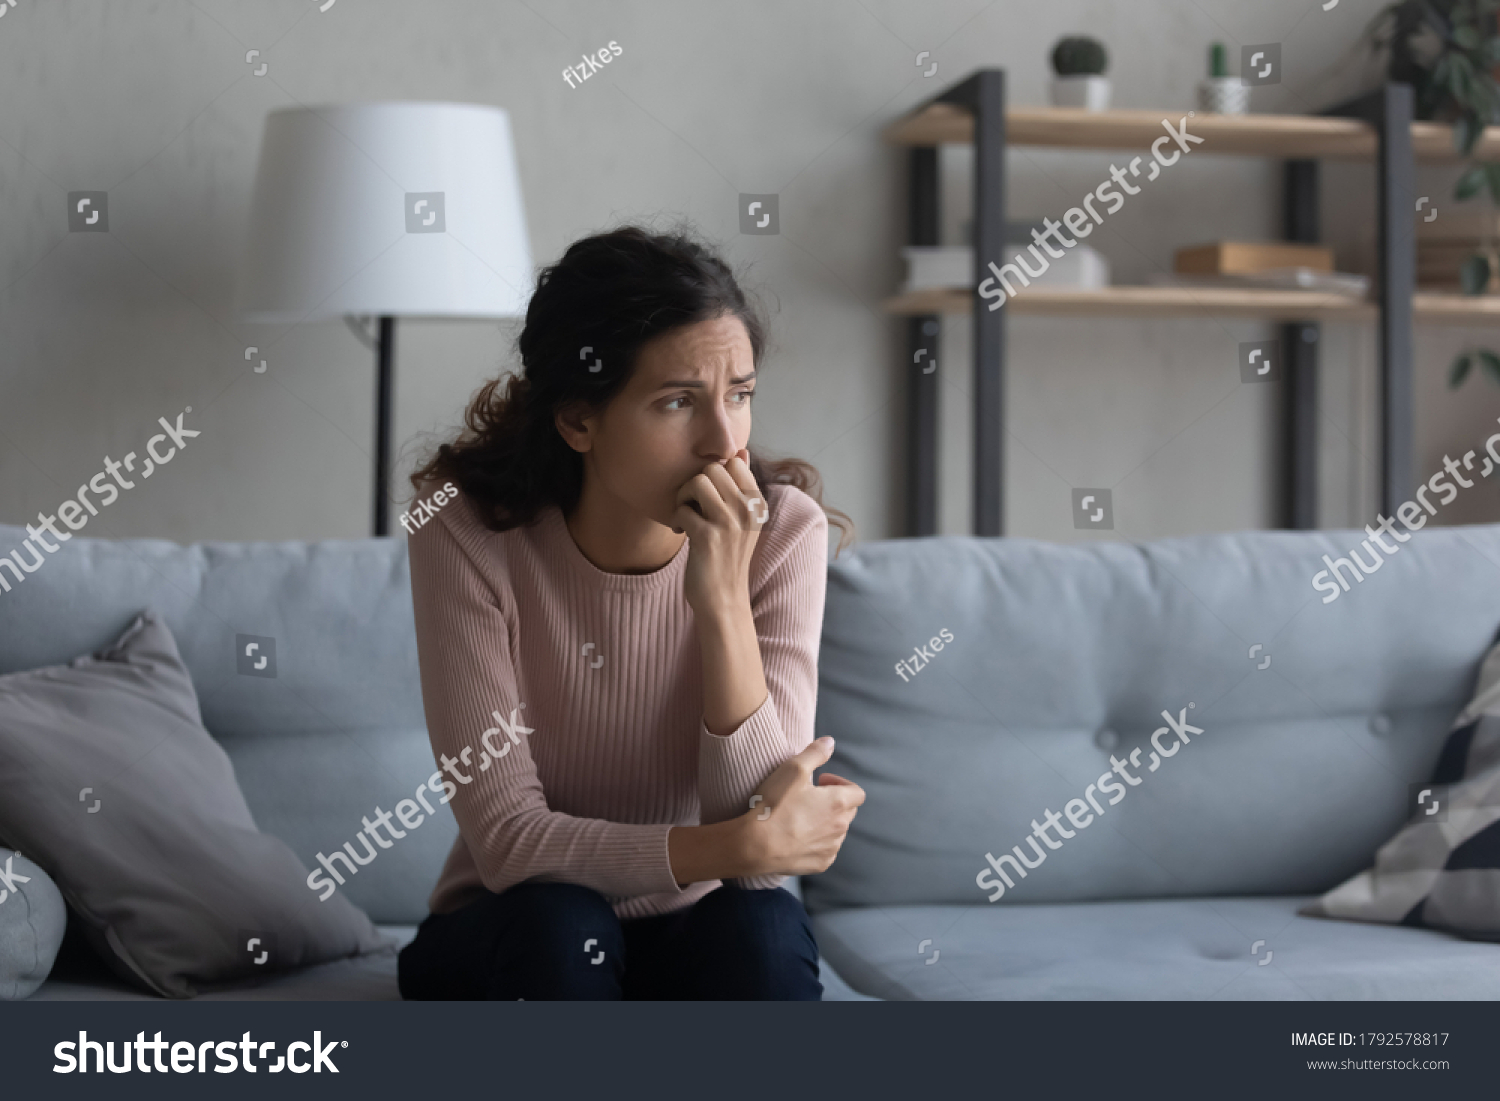 Sad young Caucasian woman sit on couch at home look in distance mourning yearning, unhappy upset female thinking suffering from relationships problems, struggle with miscarriage or abortion trouble #1792578817